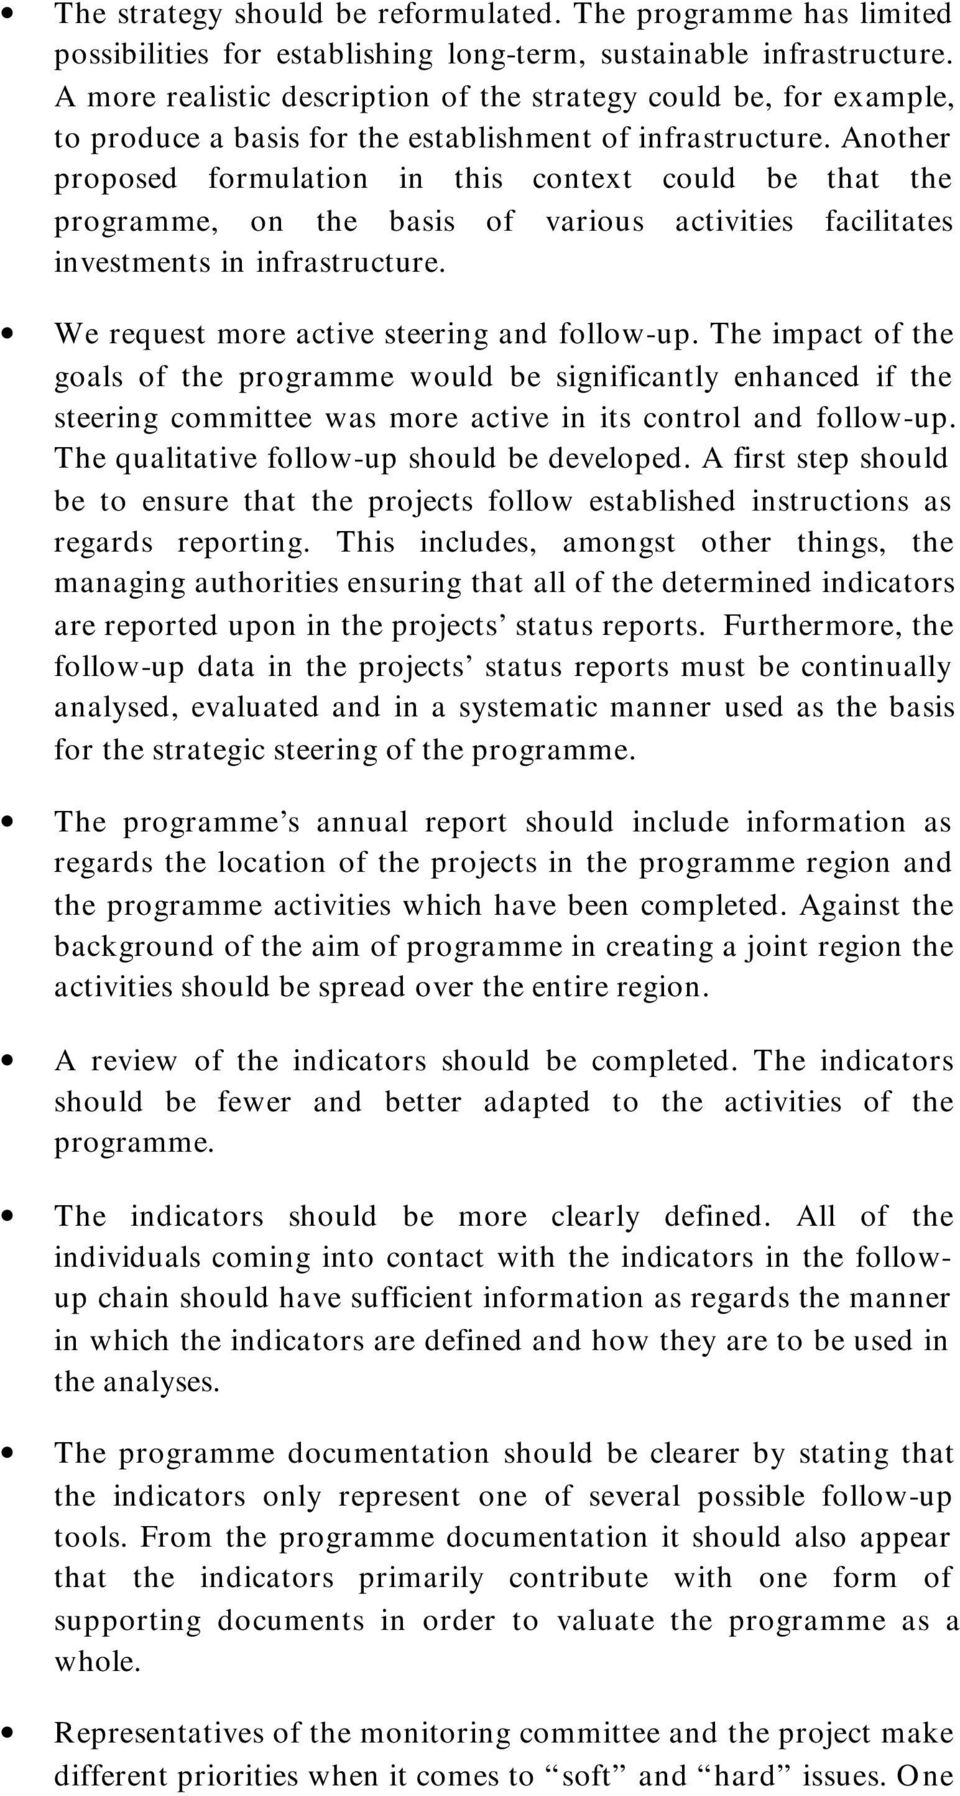 Another proposed formulation in this context could be that the programme, on the basis of various activities facilitates investments in infrastructure. We request more active steering and follow-up.